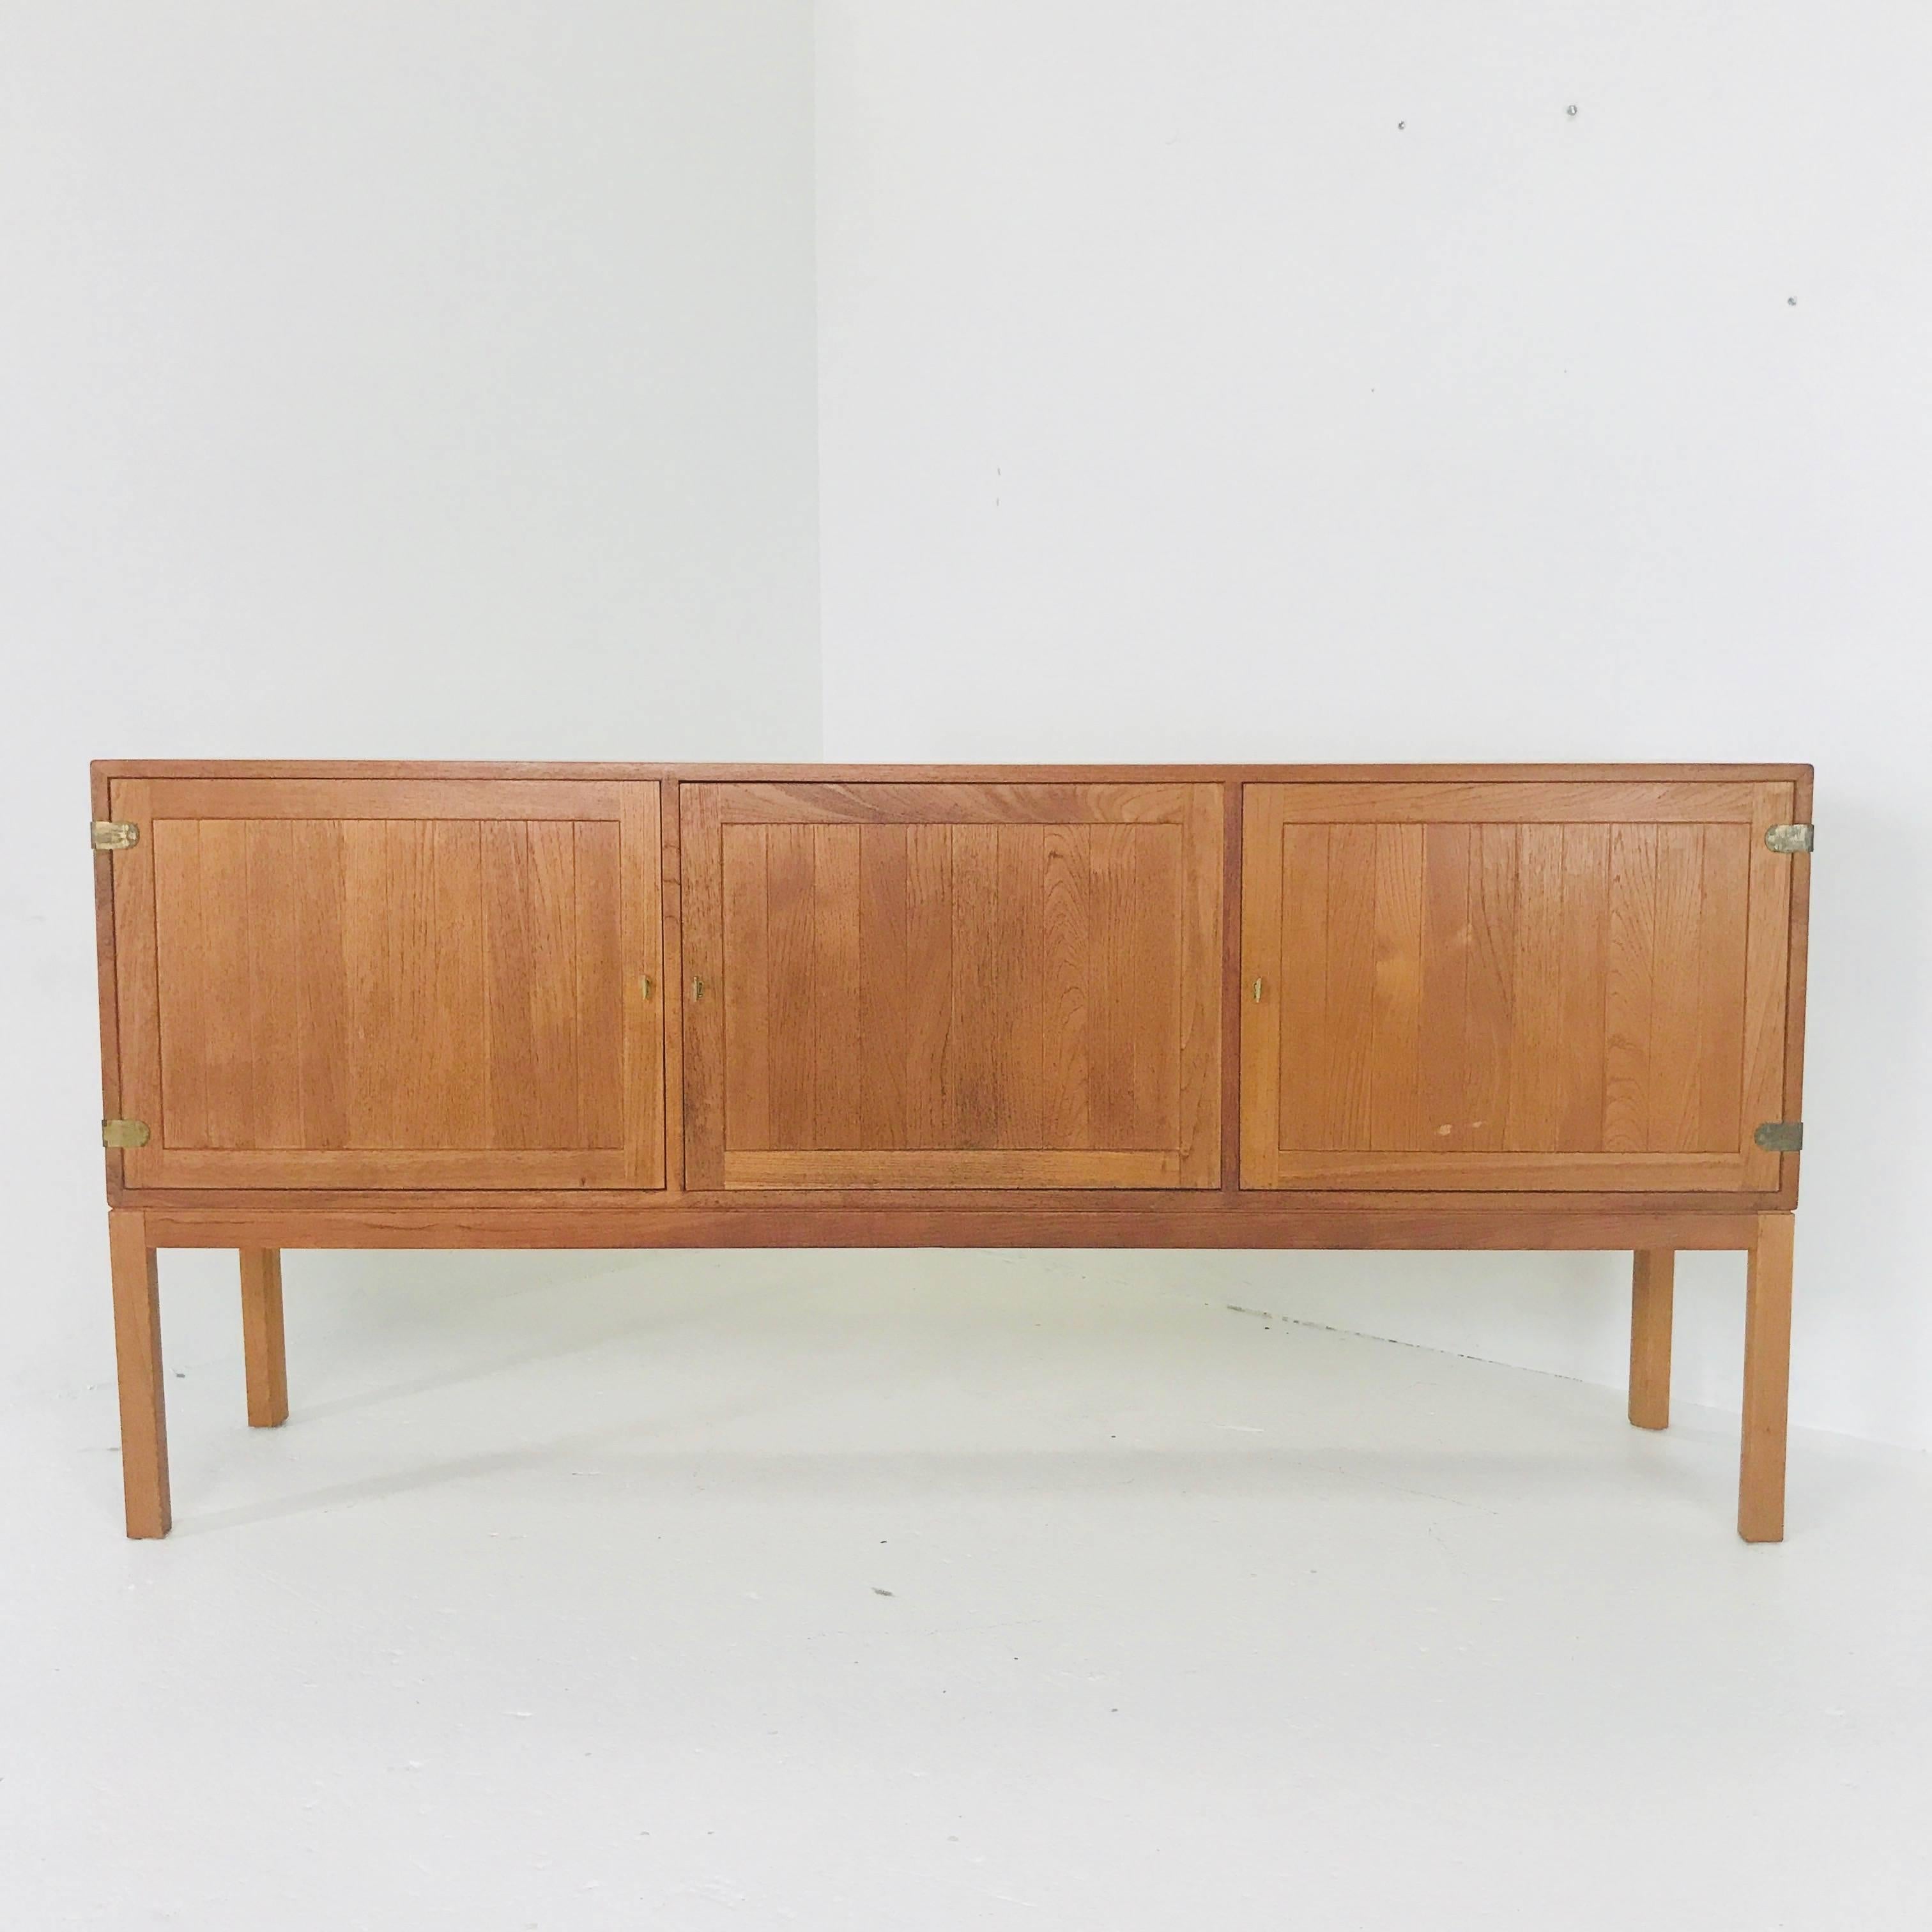 Danish sideboard by Kurt Ostervig for Randers, circa 1960s. In good Vintage condition with wear due to use and age.

Dimensions:
74